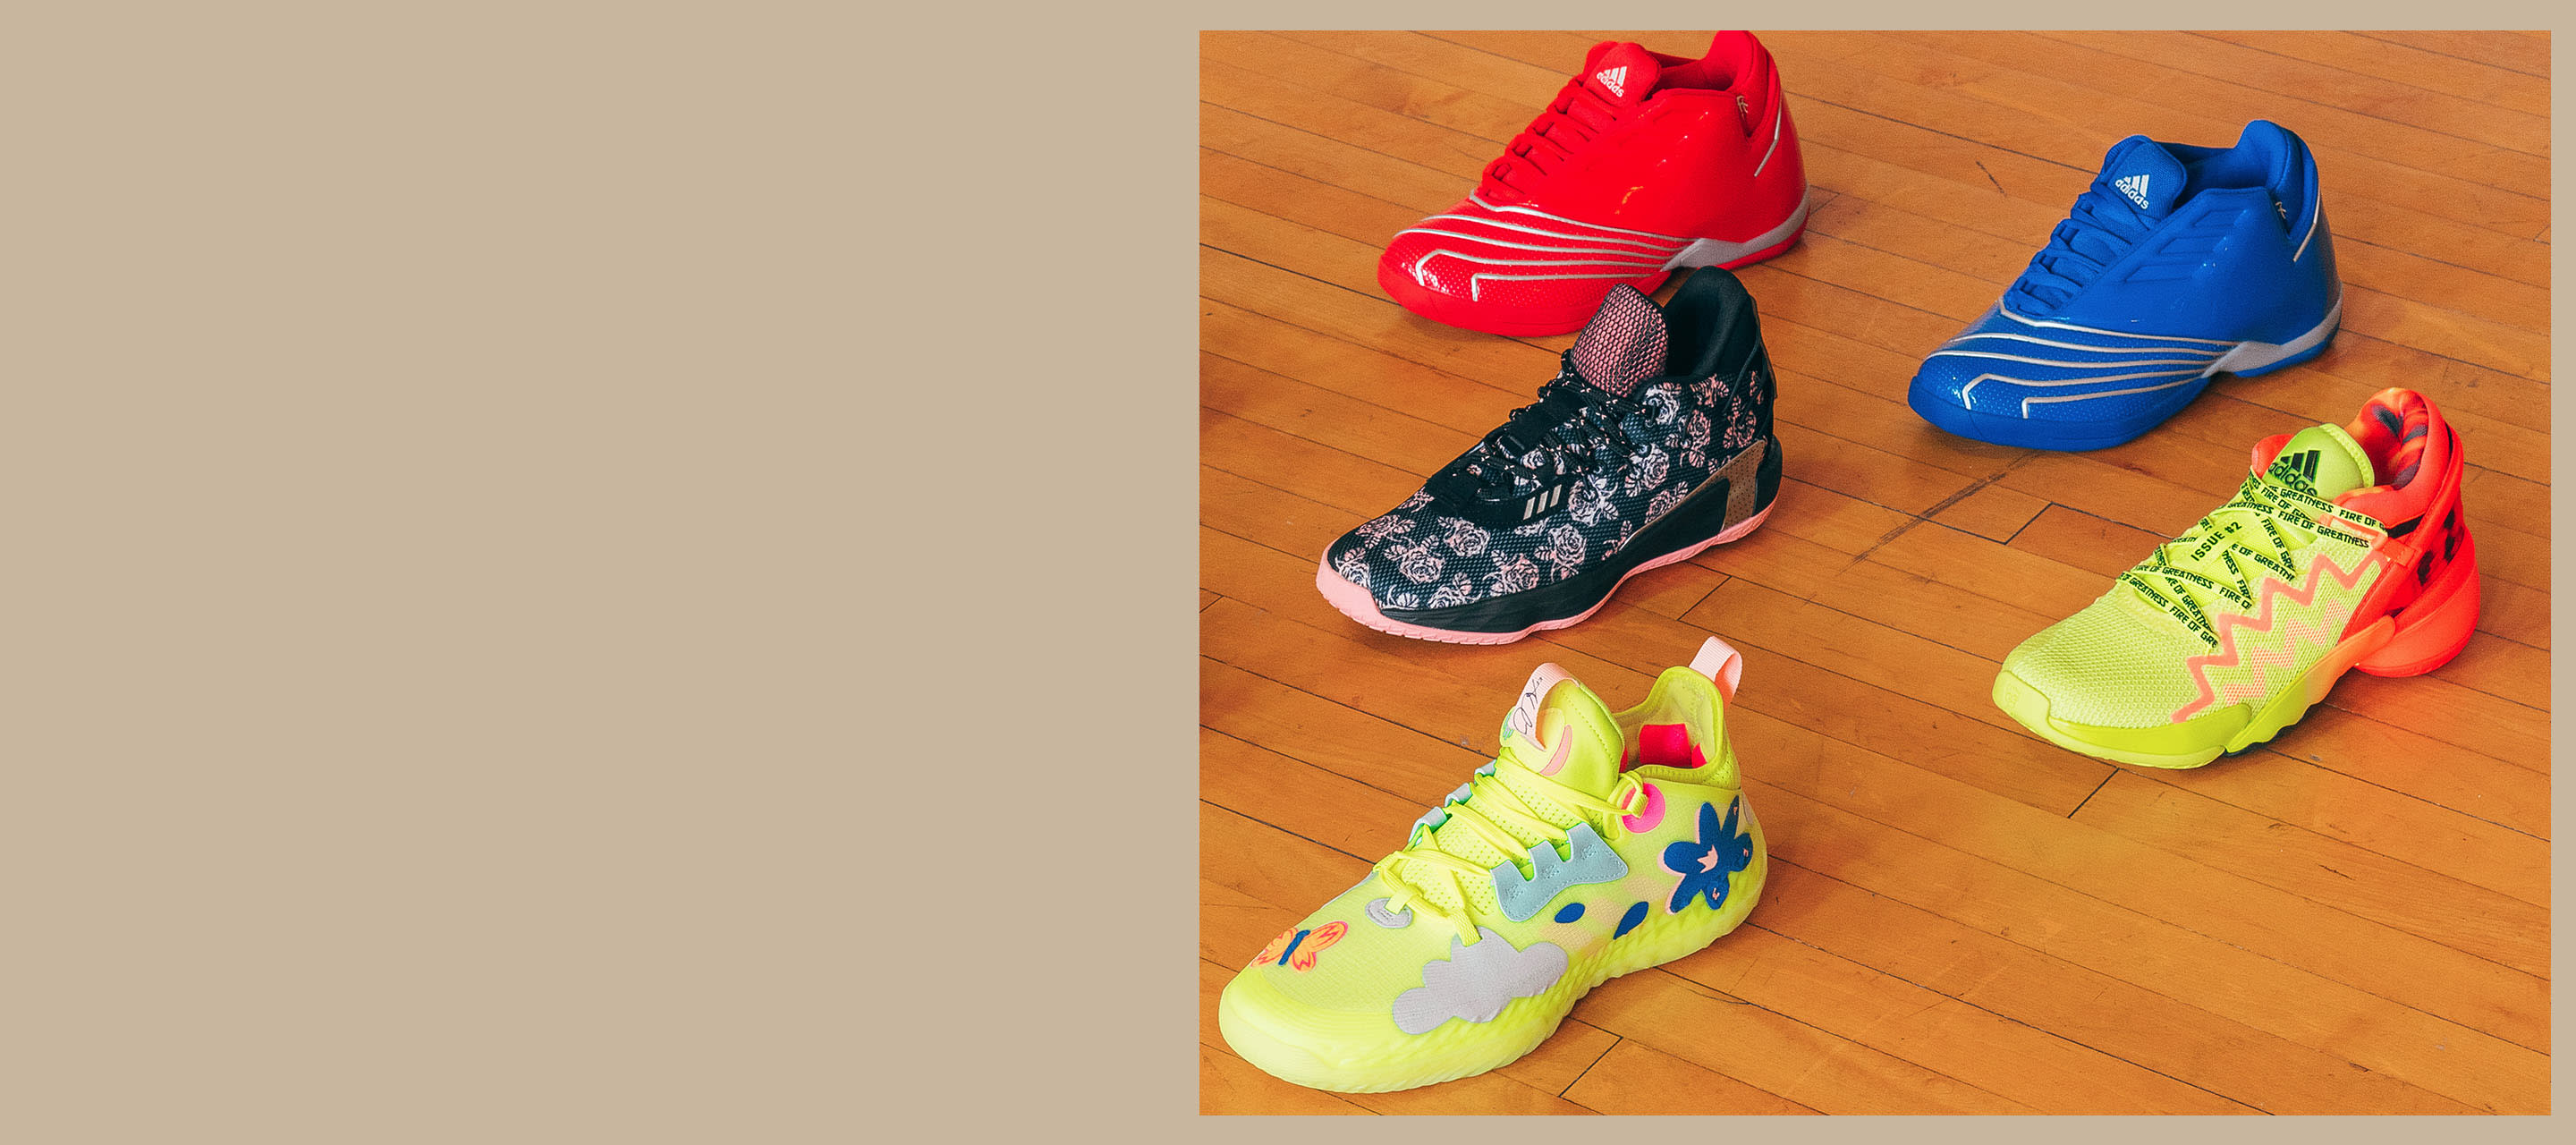 Basketball Shoes, Clothing and Accessories | adidas US